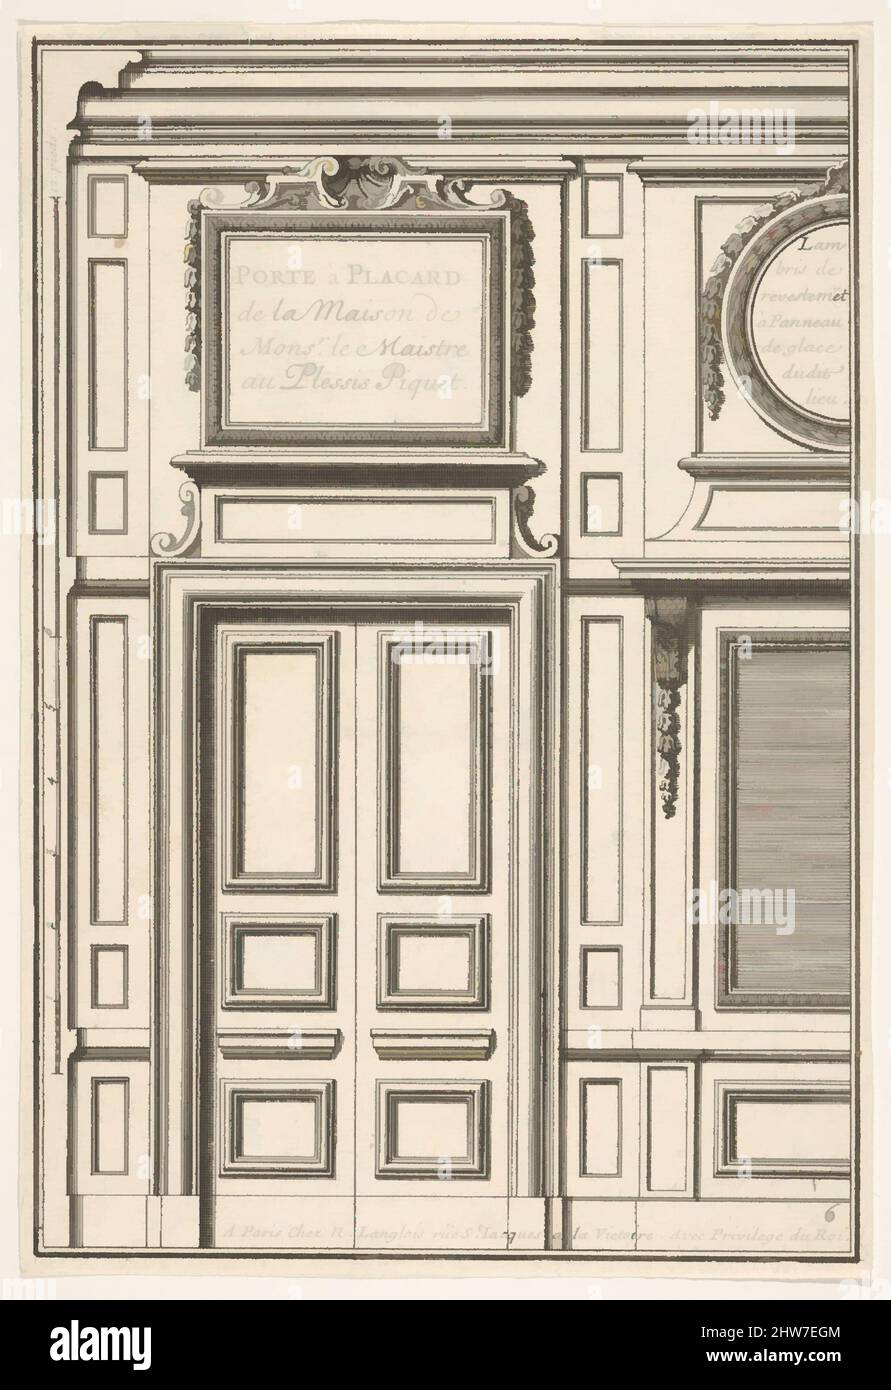 Art inspired by Door and Part of the Wall Paneling with Mirrored Glass from the House of 'Monsieur le Maître' at Plessis Piquet, plate VI from the Series 'Portes a Placard et Lambris', published as part of 'L'Architecture à la Mode', 17th century, Etching, image: 7 11/16 x 5 5/16 in. (, Classic works modernized by Artotop with a splash of modernity. Shapes, color and value, eye-catching visual impact on art. Emotions through freedom of artworks in a contemporary way. A timeless message pursuing a wildly creative new direction. Artists turning to the digital medium and creating the Artotop NFT Stock Photo